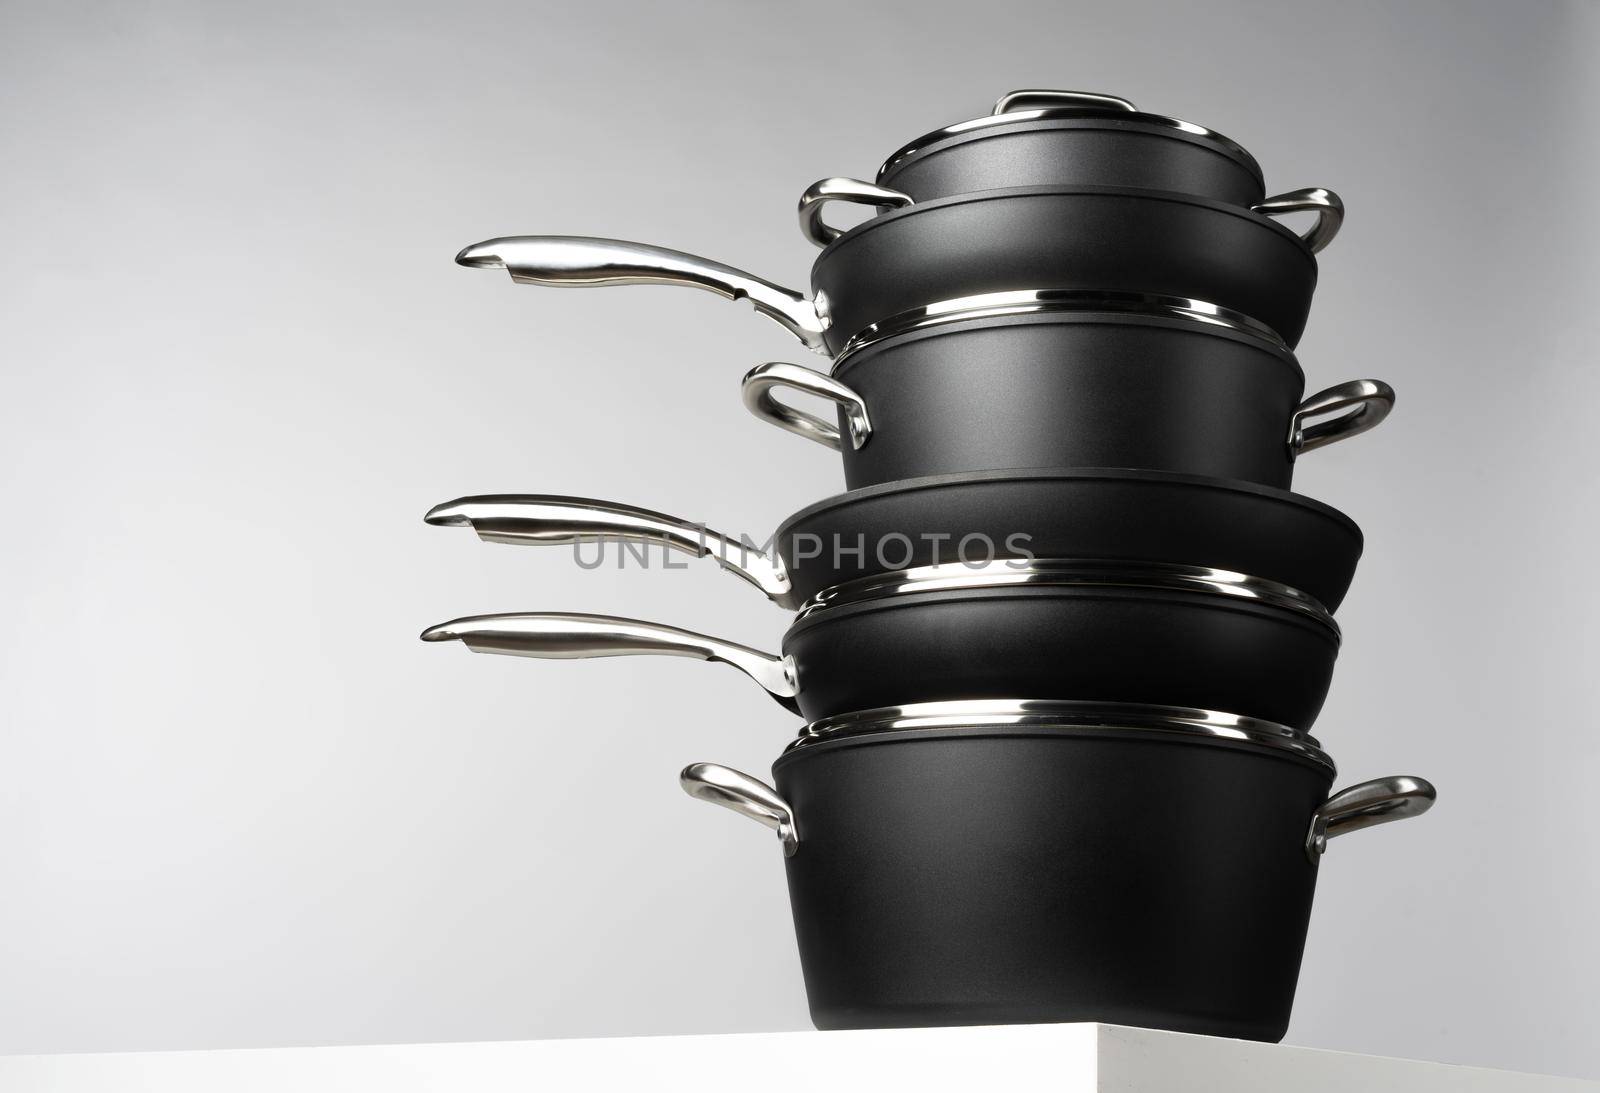 New domestic cookware on grey background close up front view